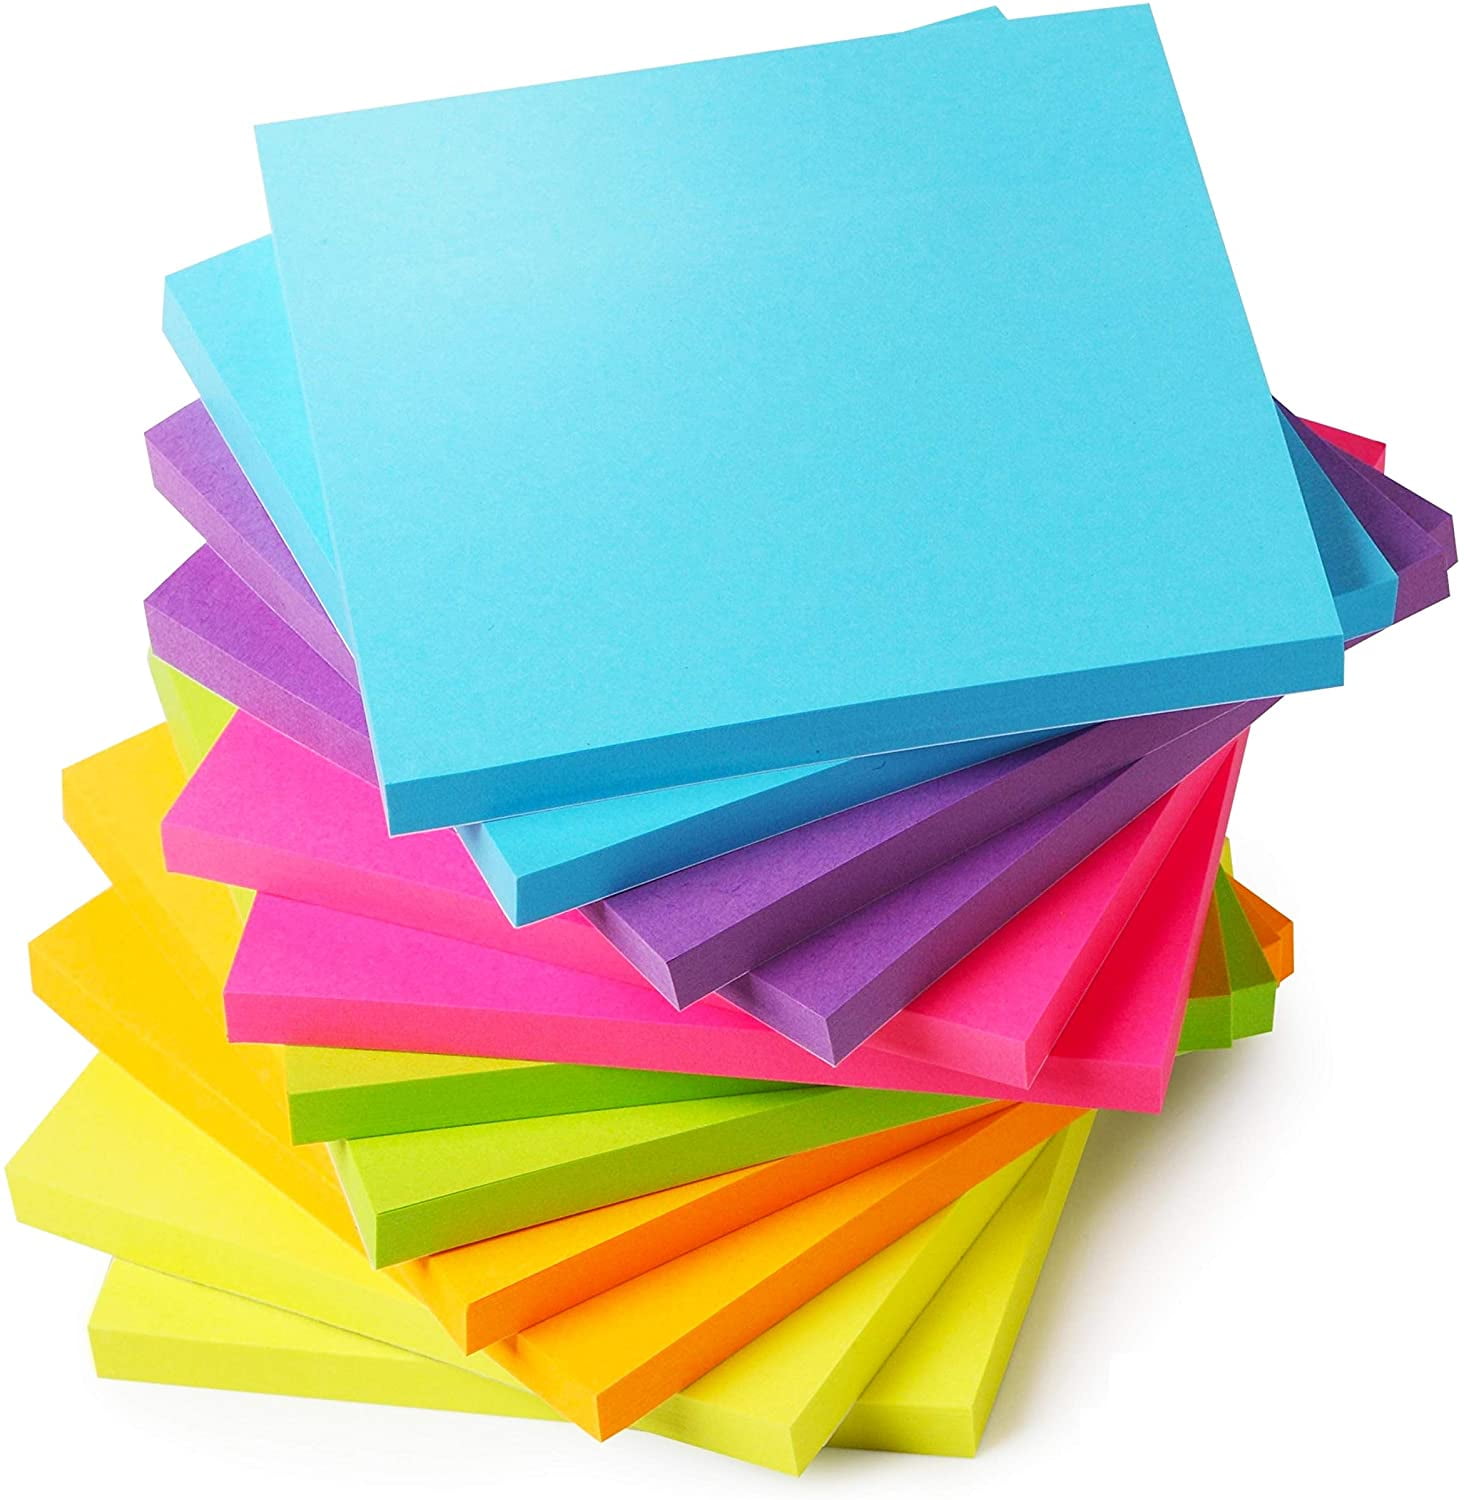 Pastel Color Stickies Notes Ruled Post Stickies Sticky Notes with Lines Colorful Sticky Notes 6 Pads Sticky Pads 45 Sheets/Pad Pen- Lined Sticky Notes 4x6 Sticky Note Pads Mr 